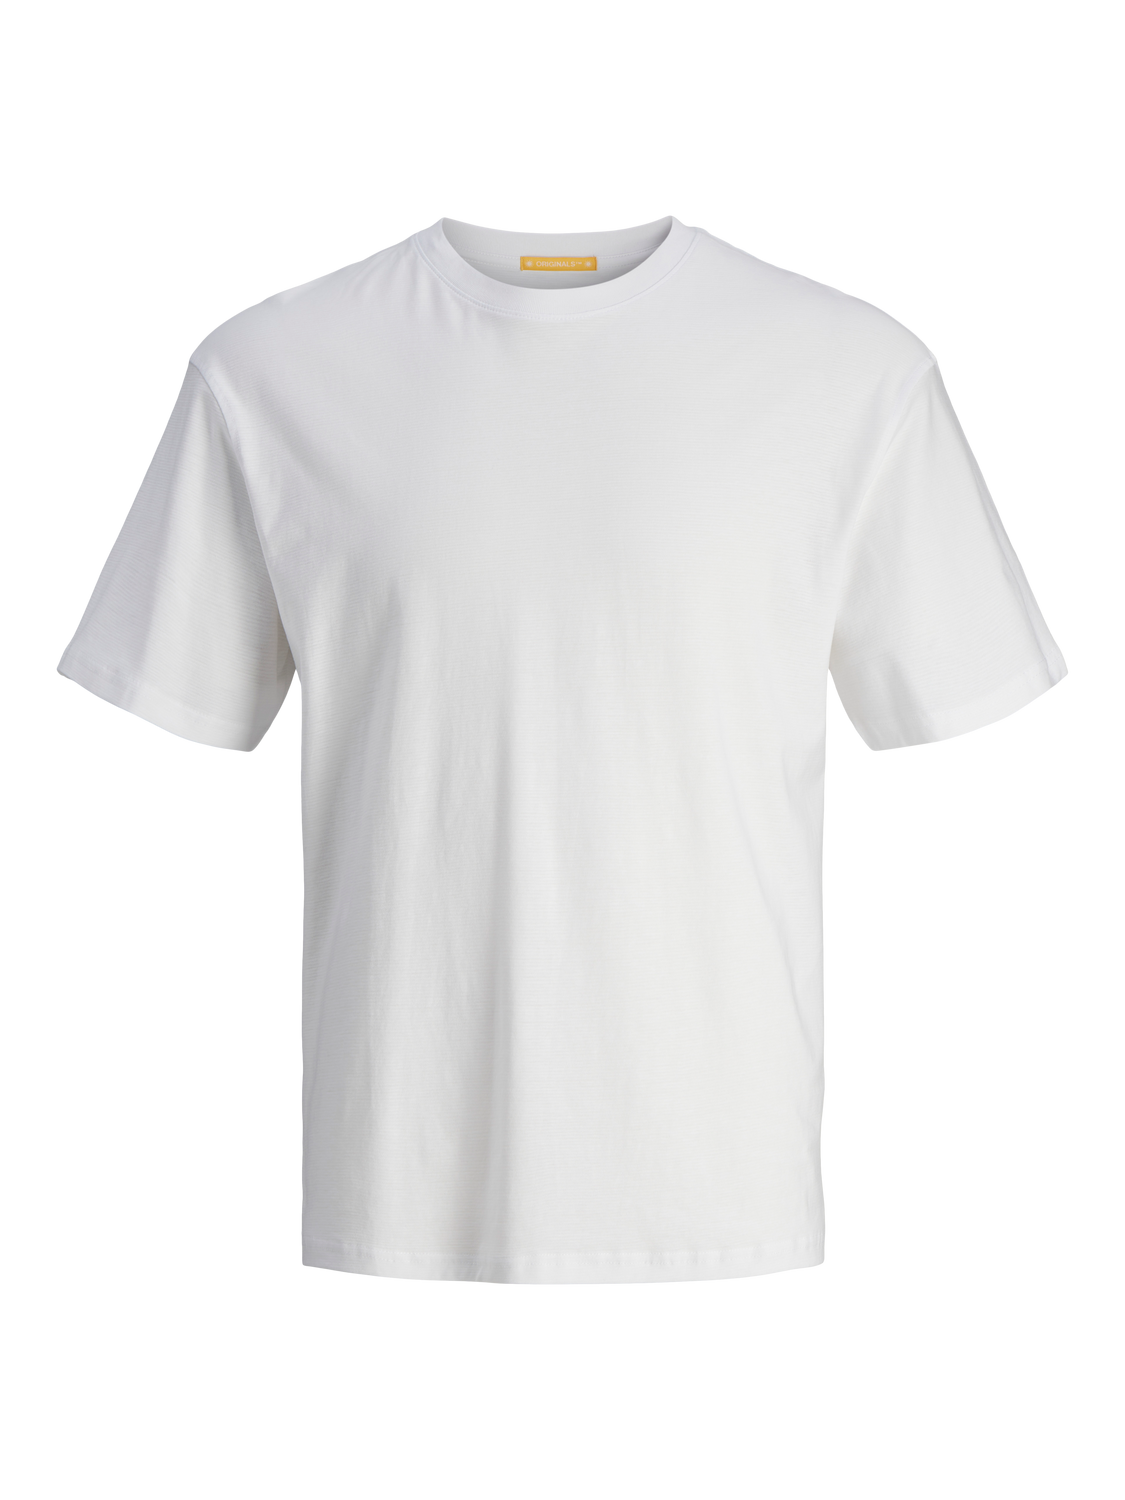 Jack & Jones Relaxed Fit Crew neck T-Shirt -Bright White - 12255351